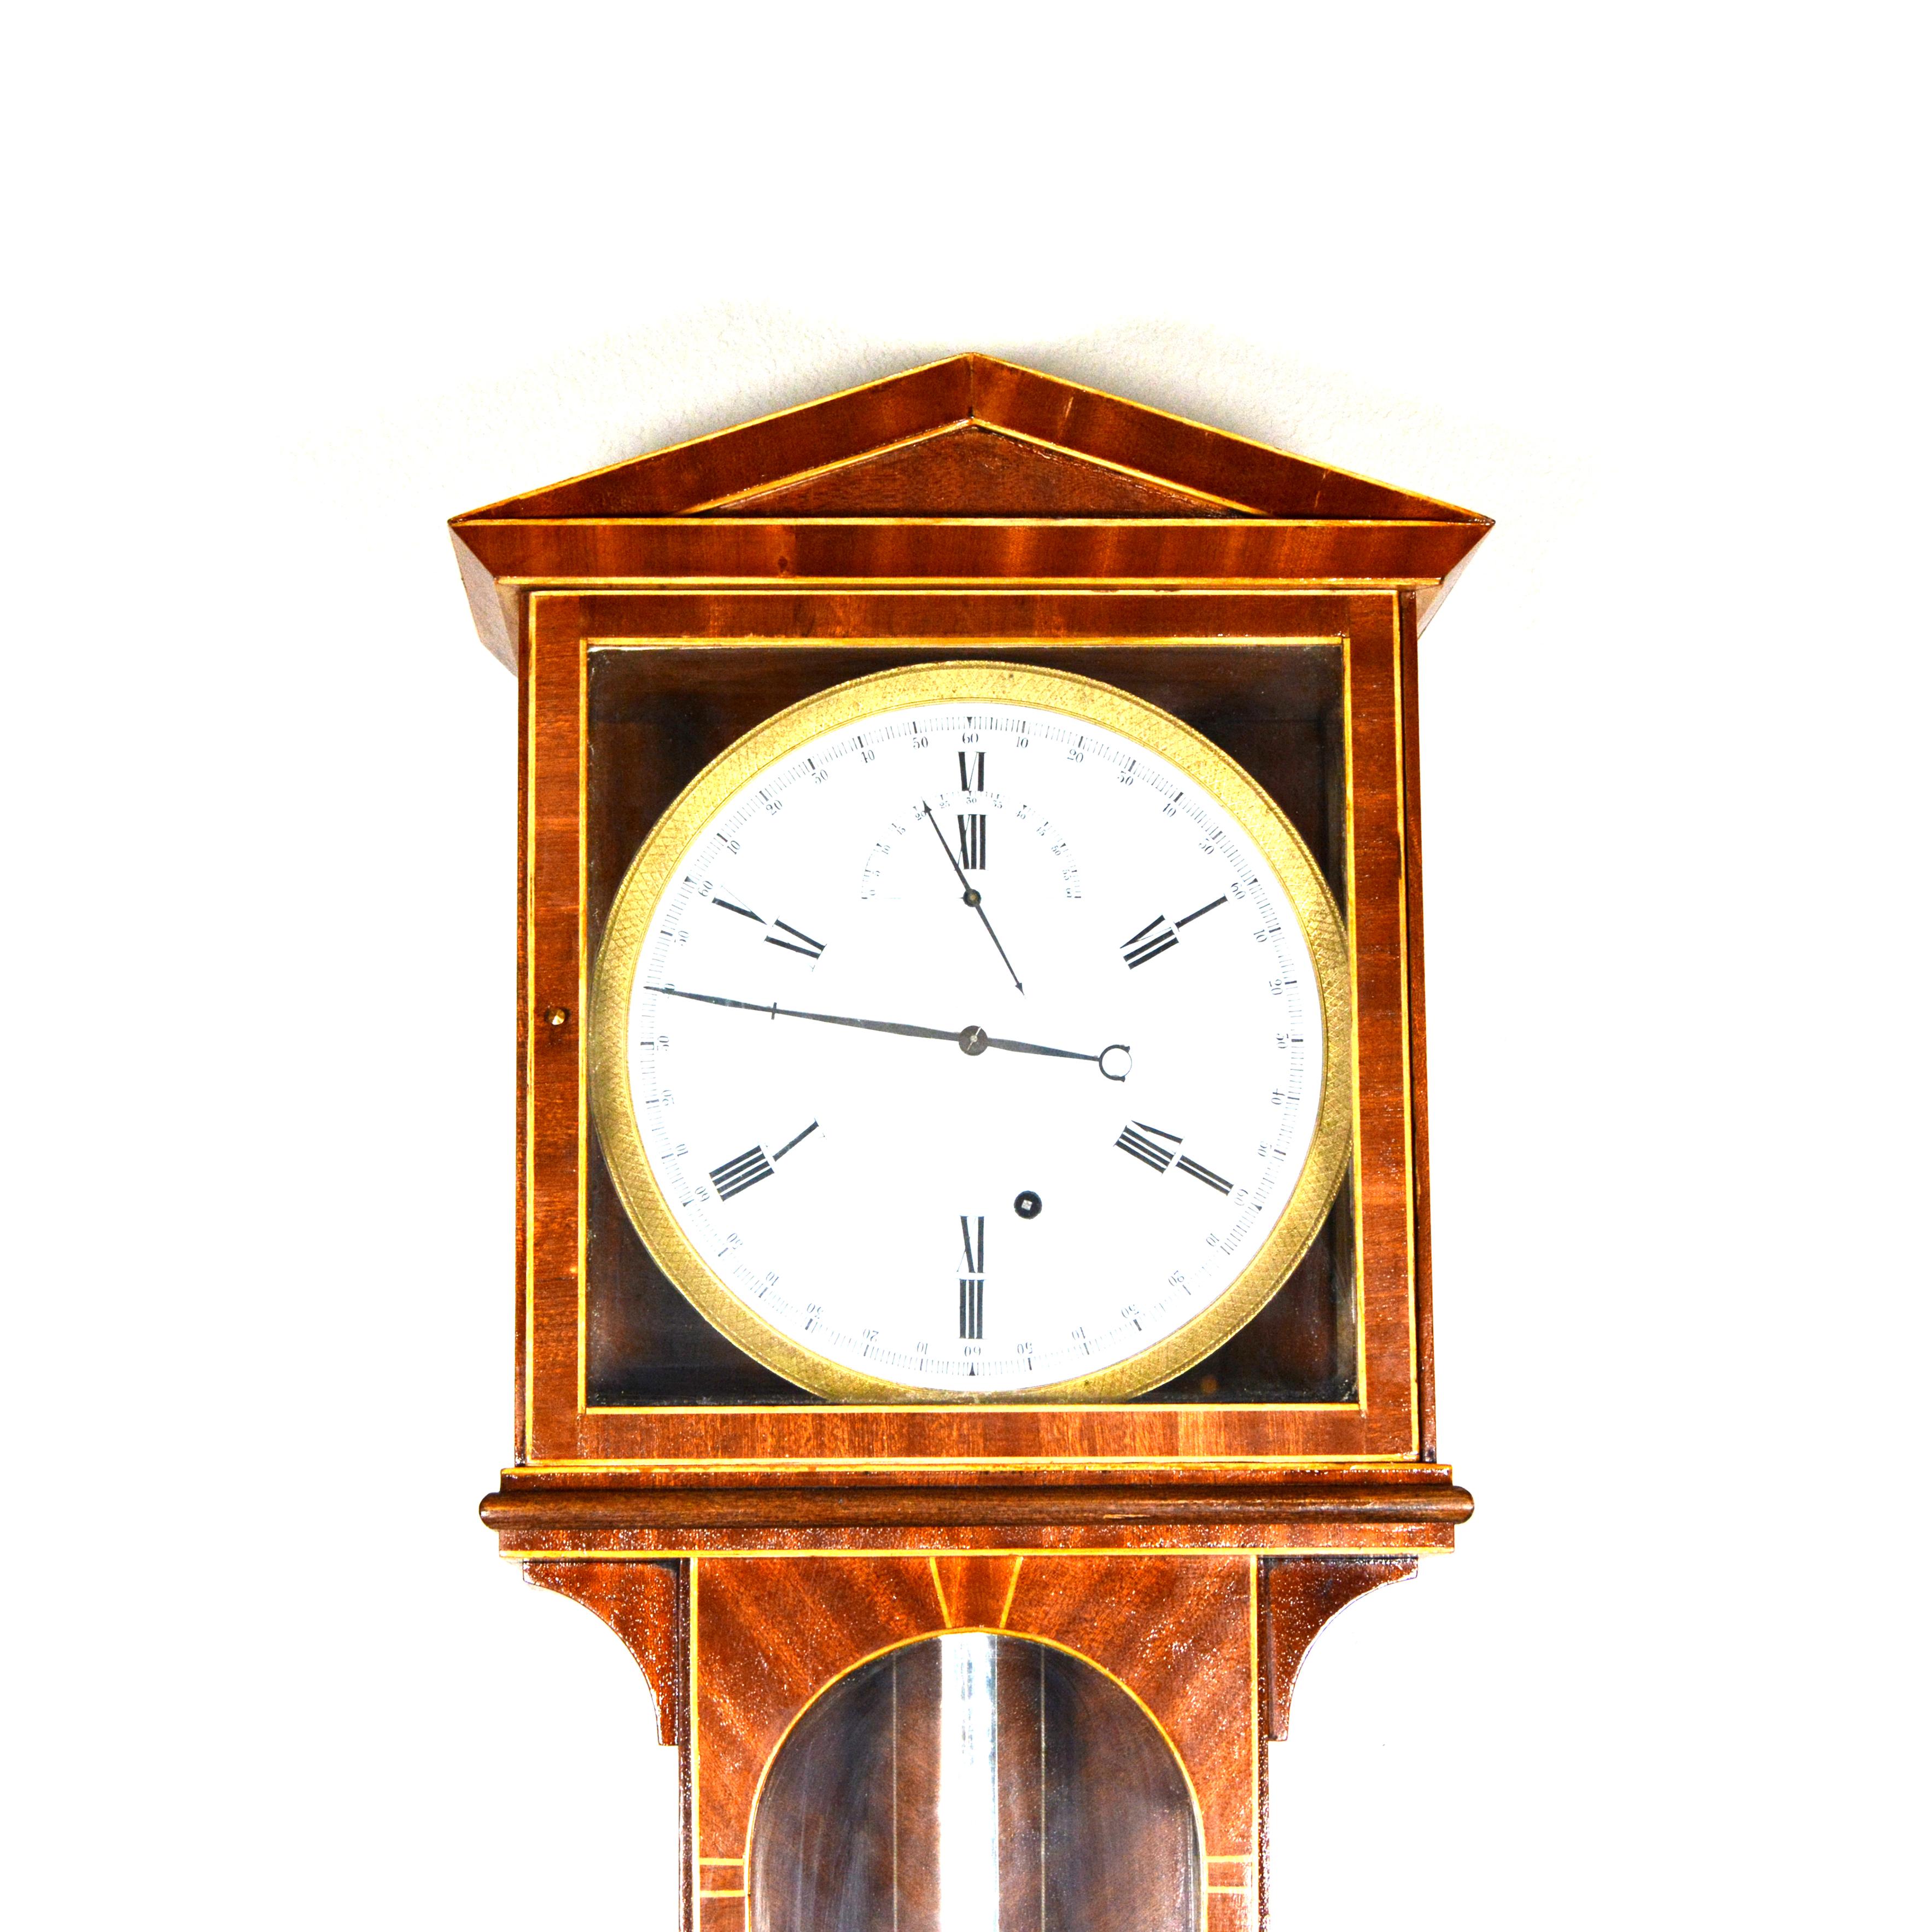 Vienna Laterndluhr 1 YEAR MOVEMENT Regulator Wall Clock

Here is an extremely top museum quality Vienna LATERNDLUHR regulator wall clock. It has an one year movement driven by a single weight. The clock runs for one year on one single winding. The